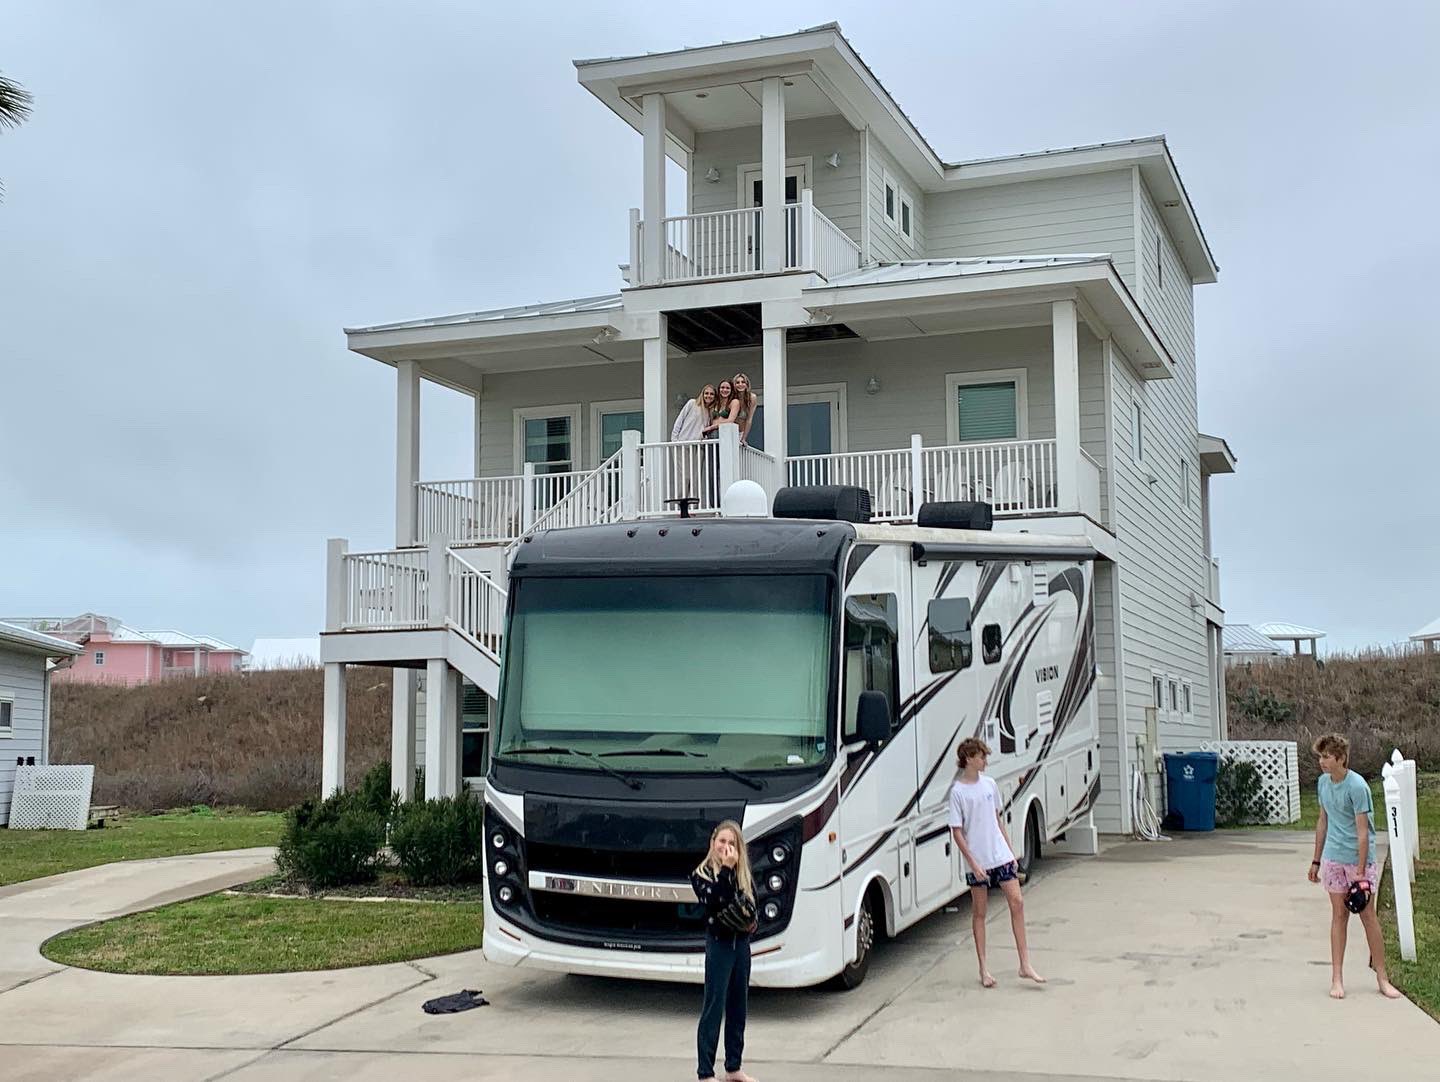 Kevin Millar on X: We made it…… 10 kiddos 1 wife and 1 RV….. to the  beach…. #roadTrip #family #springbreak 🇺🇸🇺🇸🇺🇸🇺🇸🇺🇸   / X